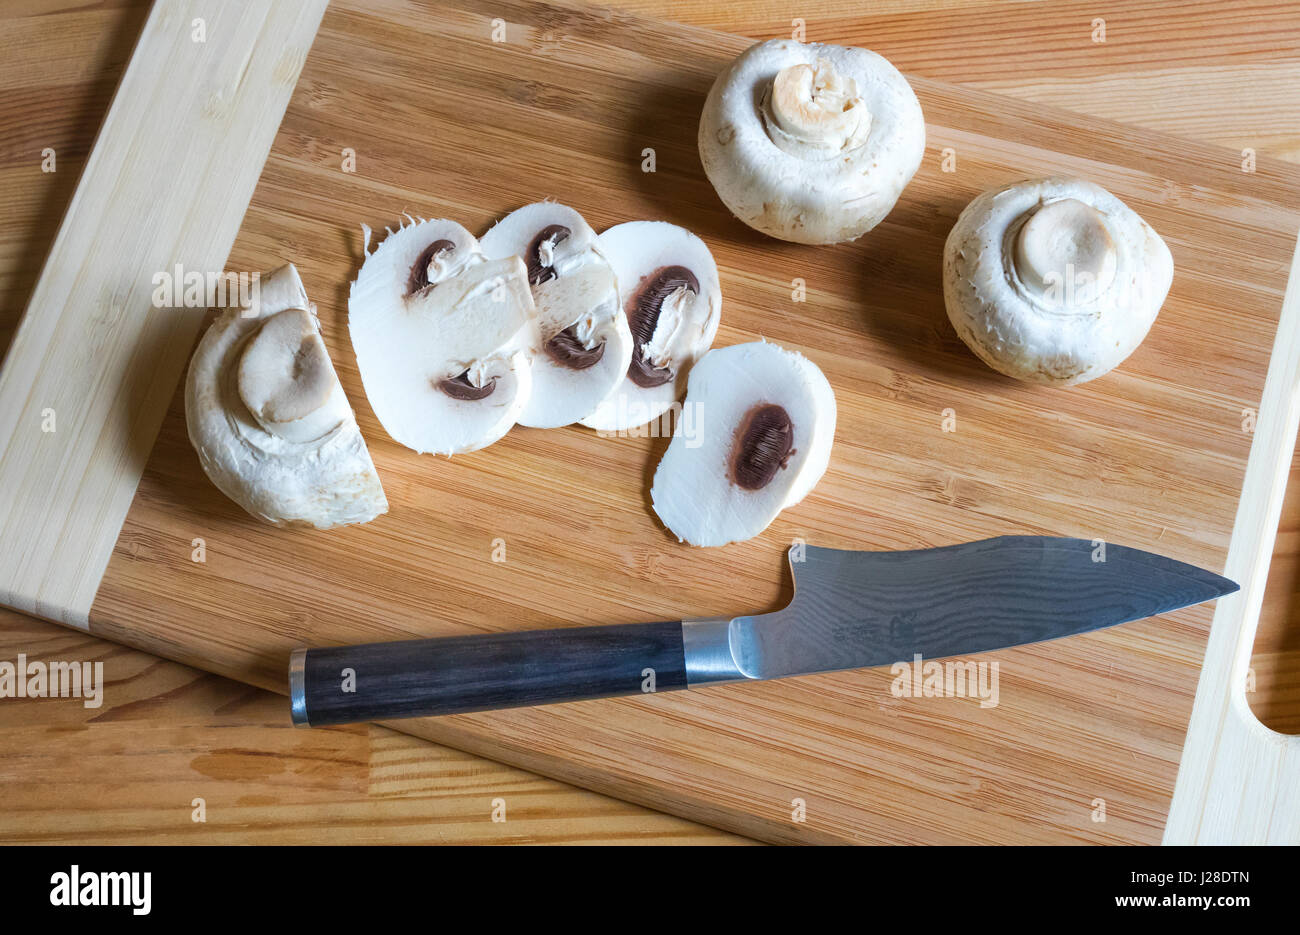 Button mushrooms and high end paring knife and wooden cutting board Stock Photo